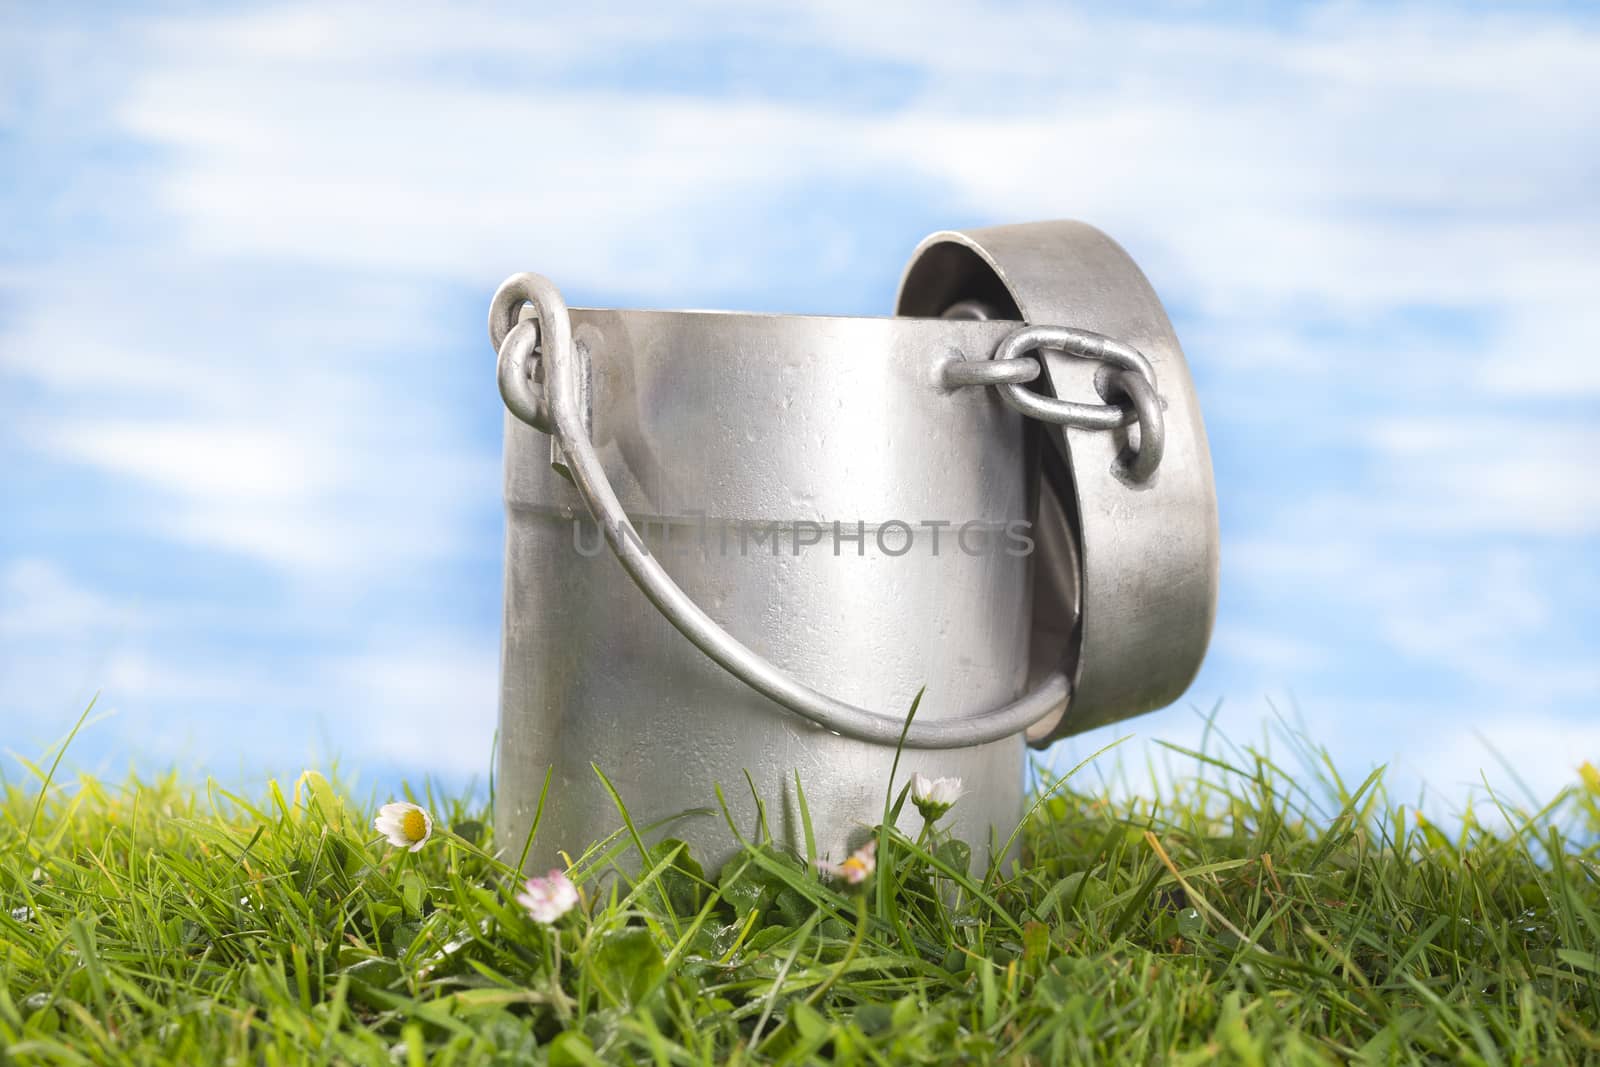 Milk Jug aluminum  on the grass with cflowers  the sky with clouds by JPC-PROD